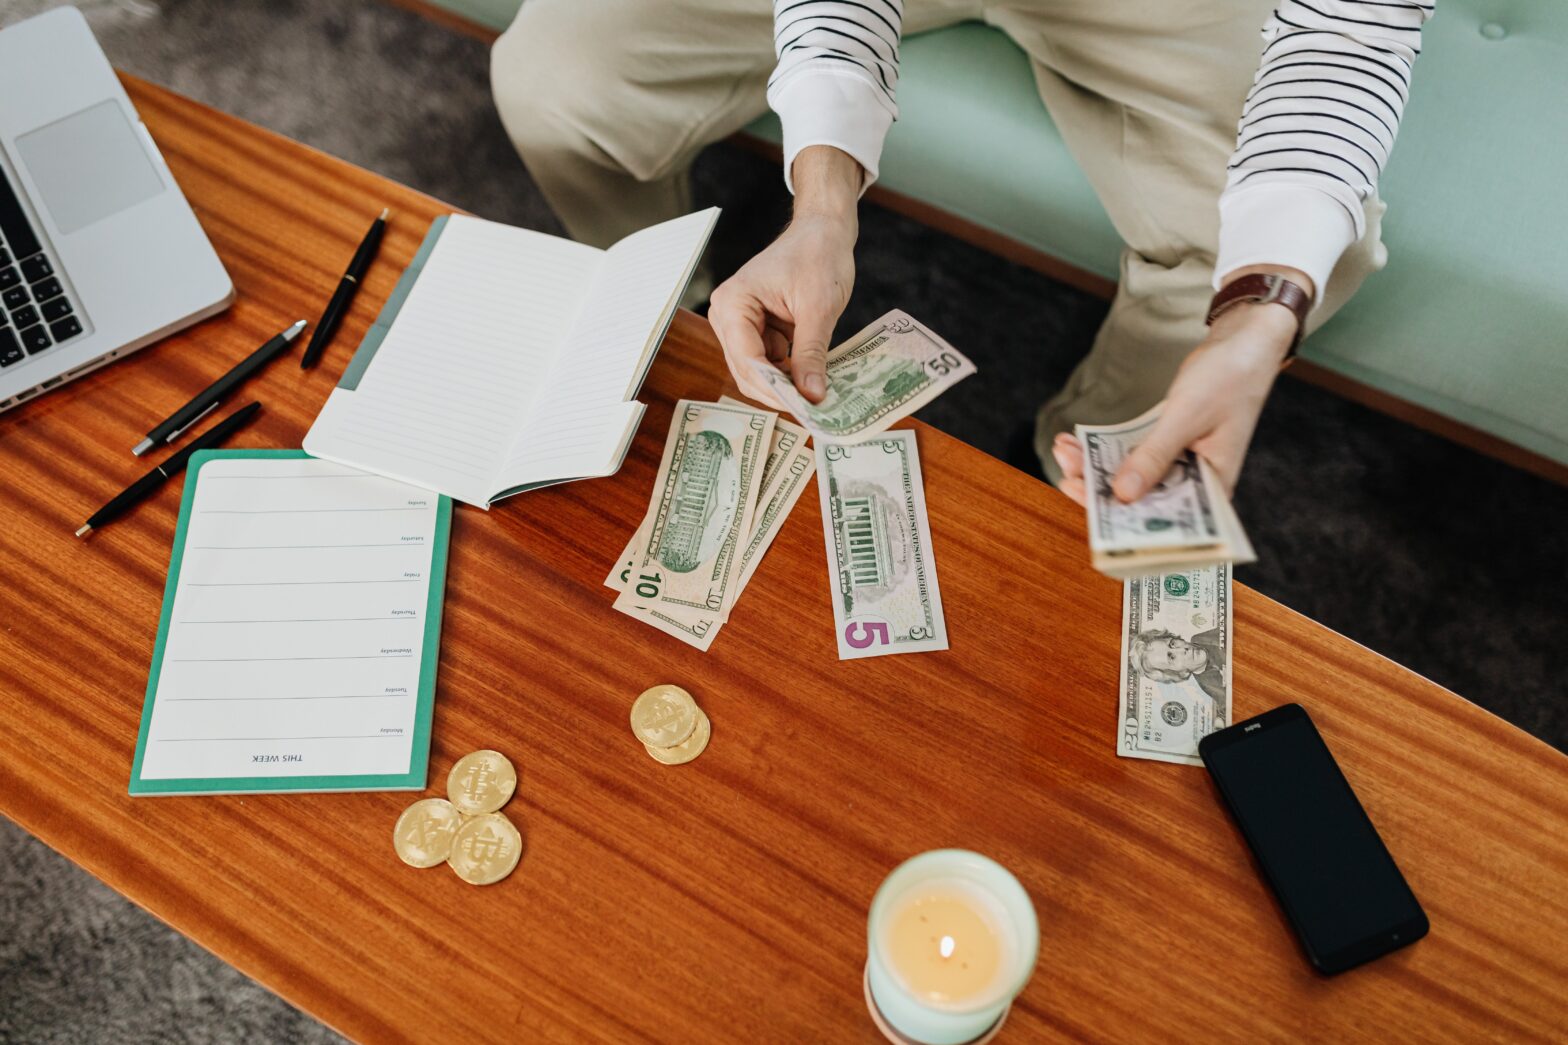 A photo of a person counting or allotting money bills on the table along with coins and notes, that can be used in private equity funds investments